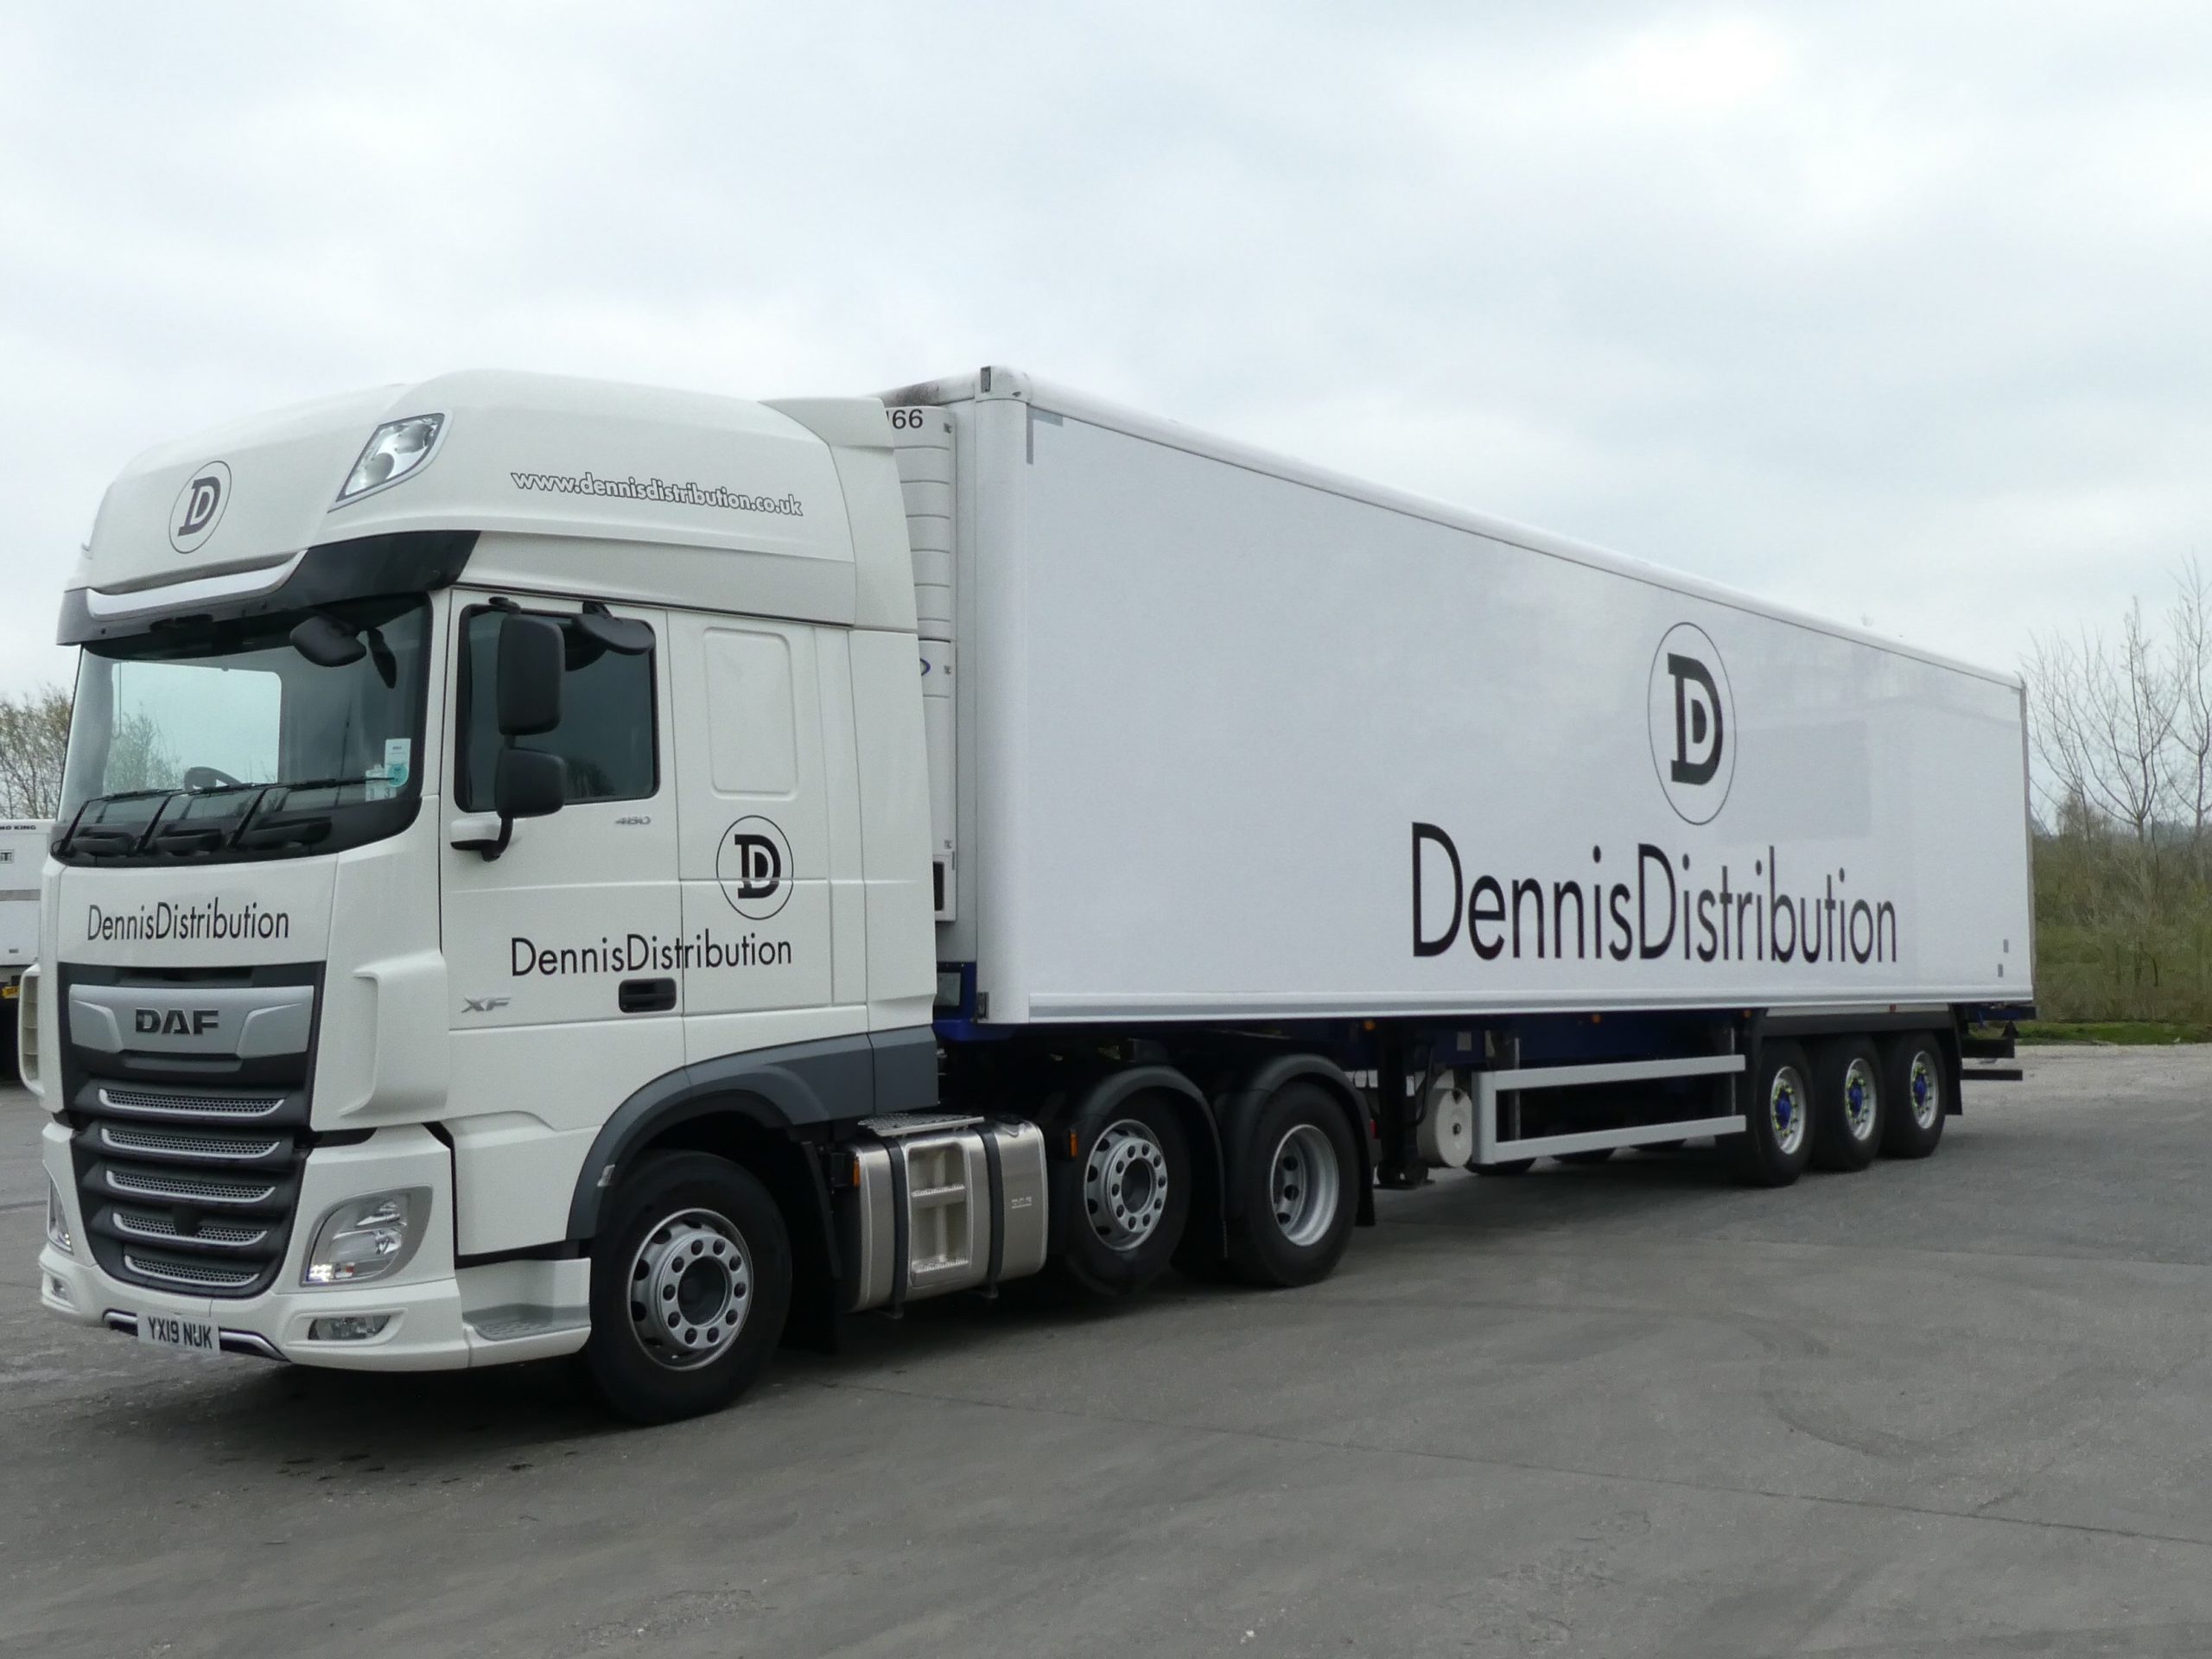 Dennis Distribution takes delivery of eight new Cartwright fridge trailers